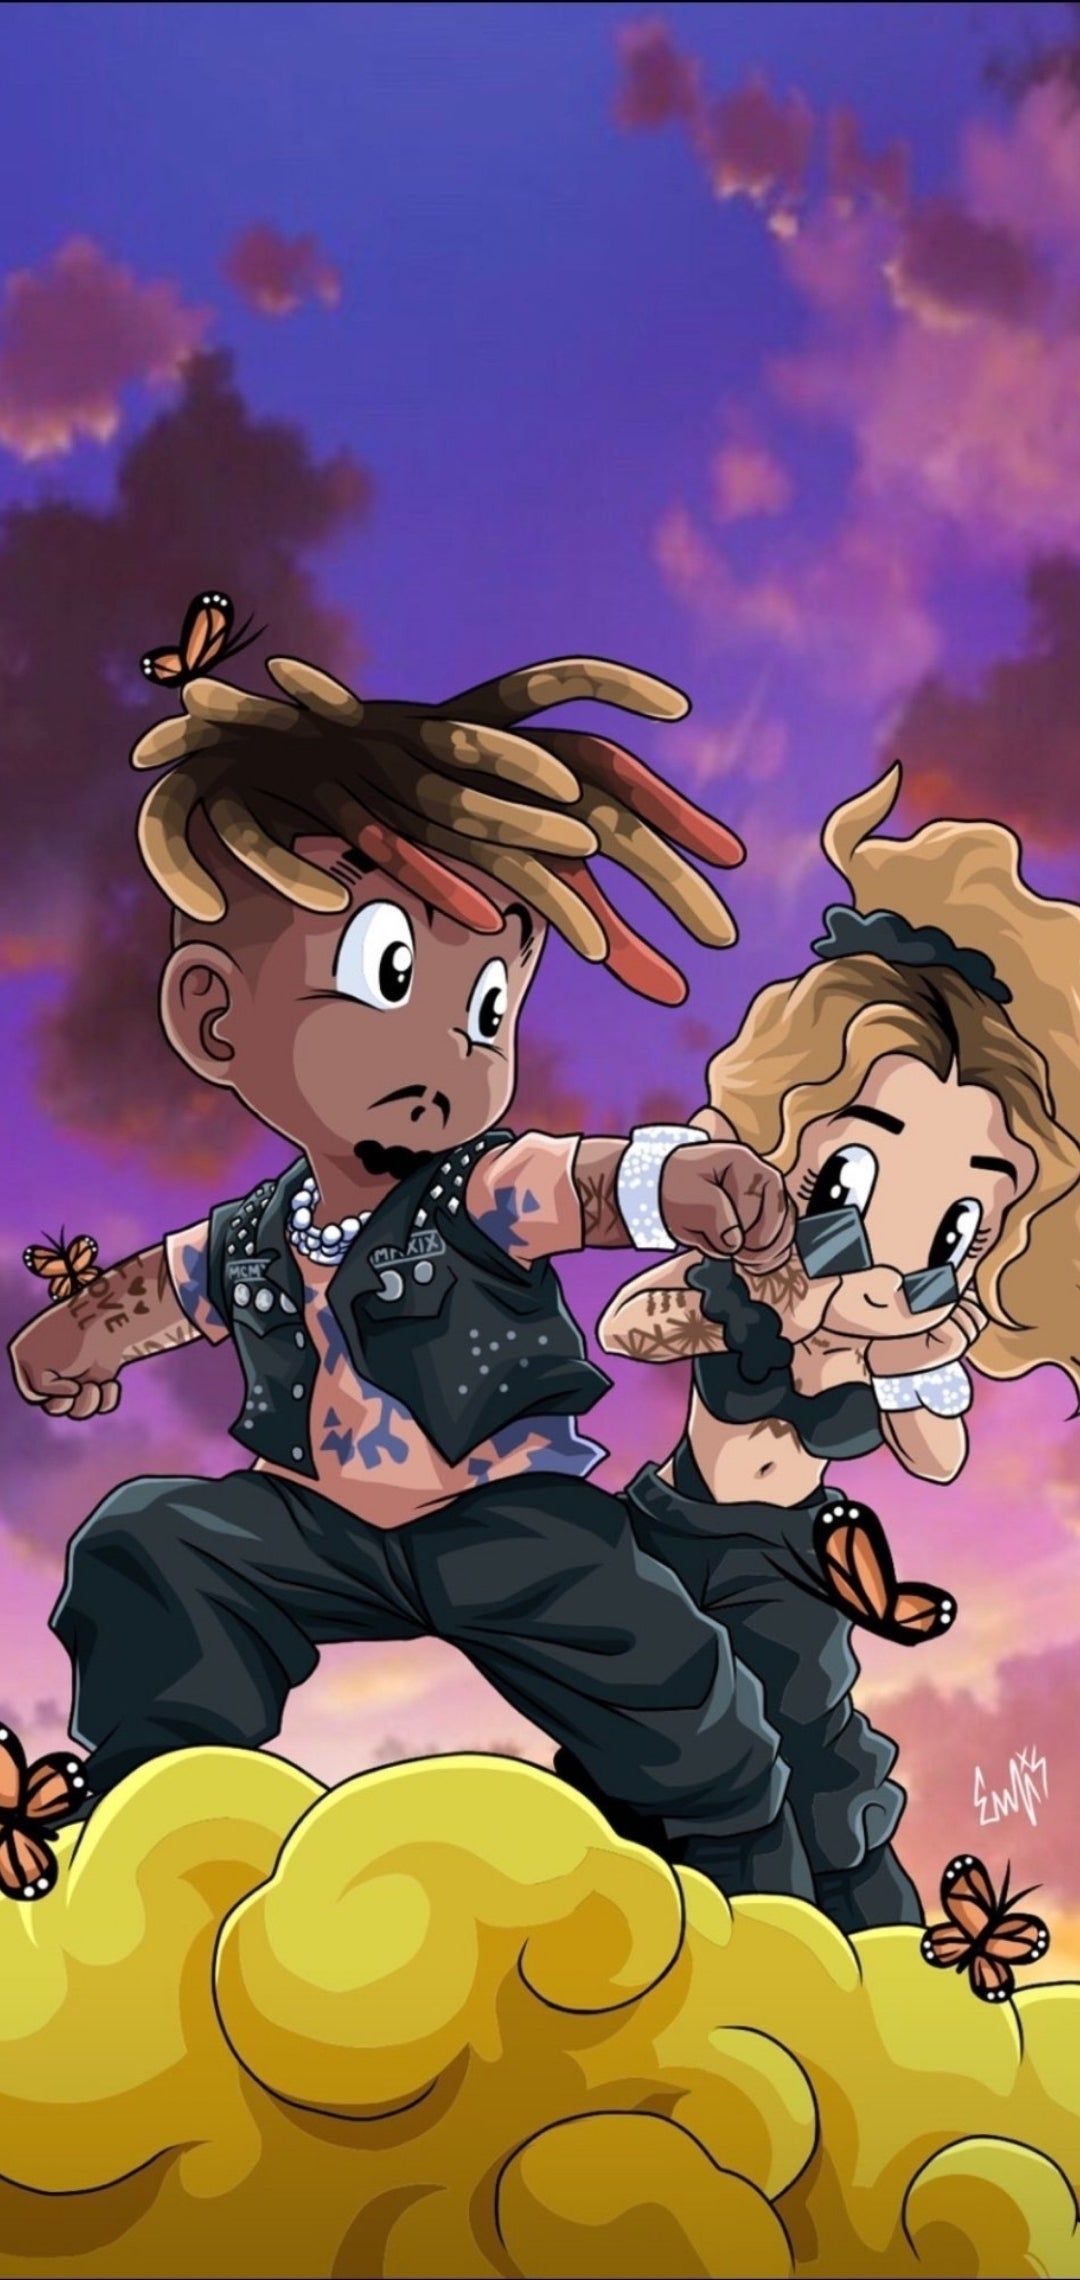 Found an amazing wallpaper of ally and juice wrld as goku and chichi artist: elixdrawz